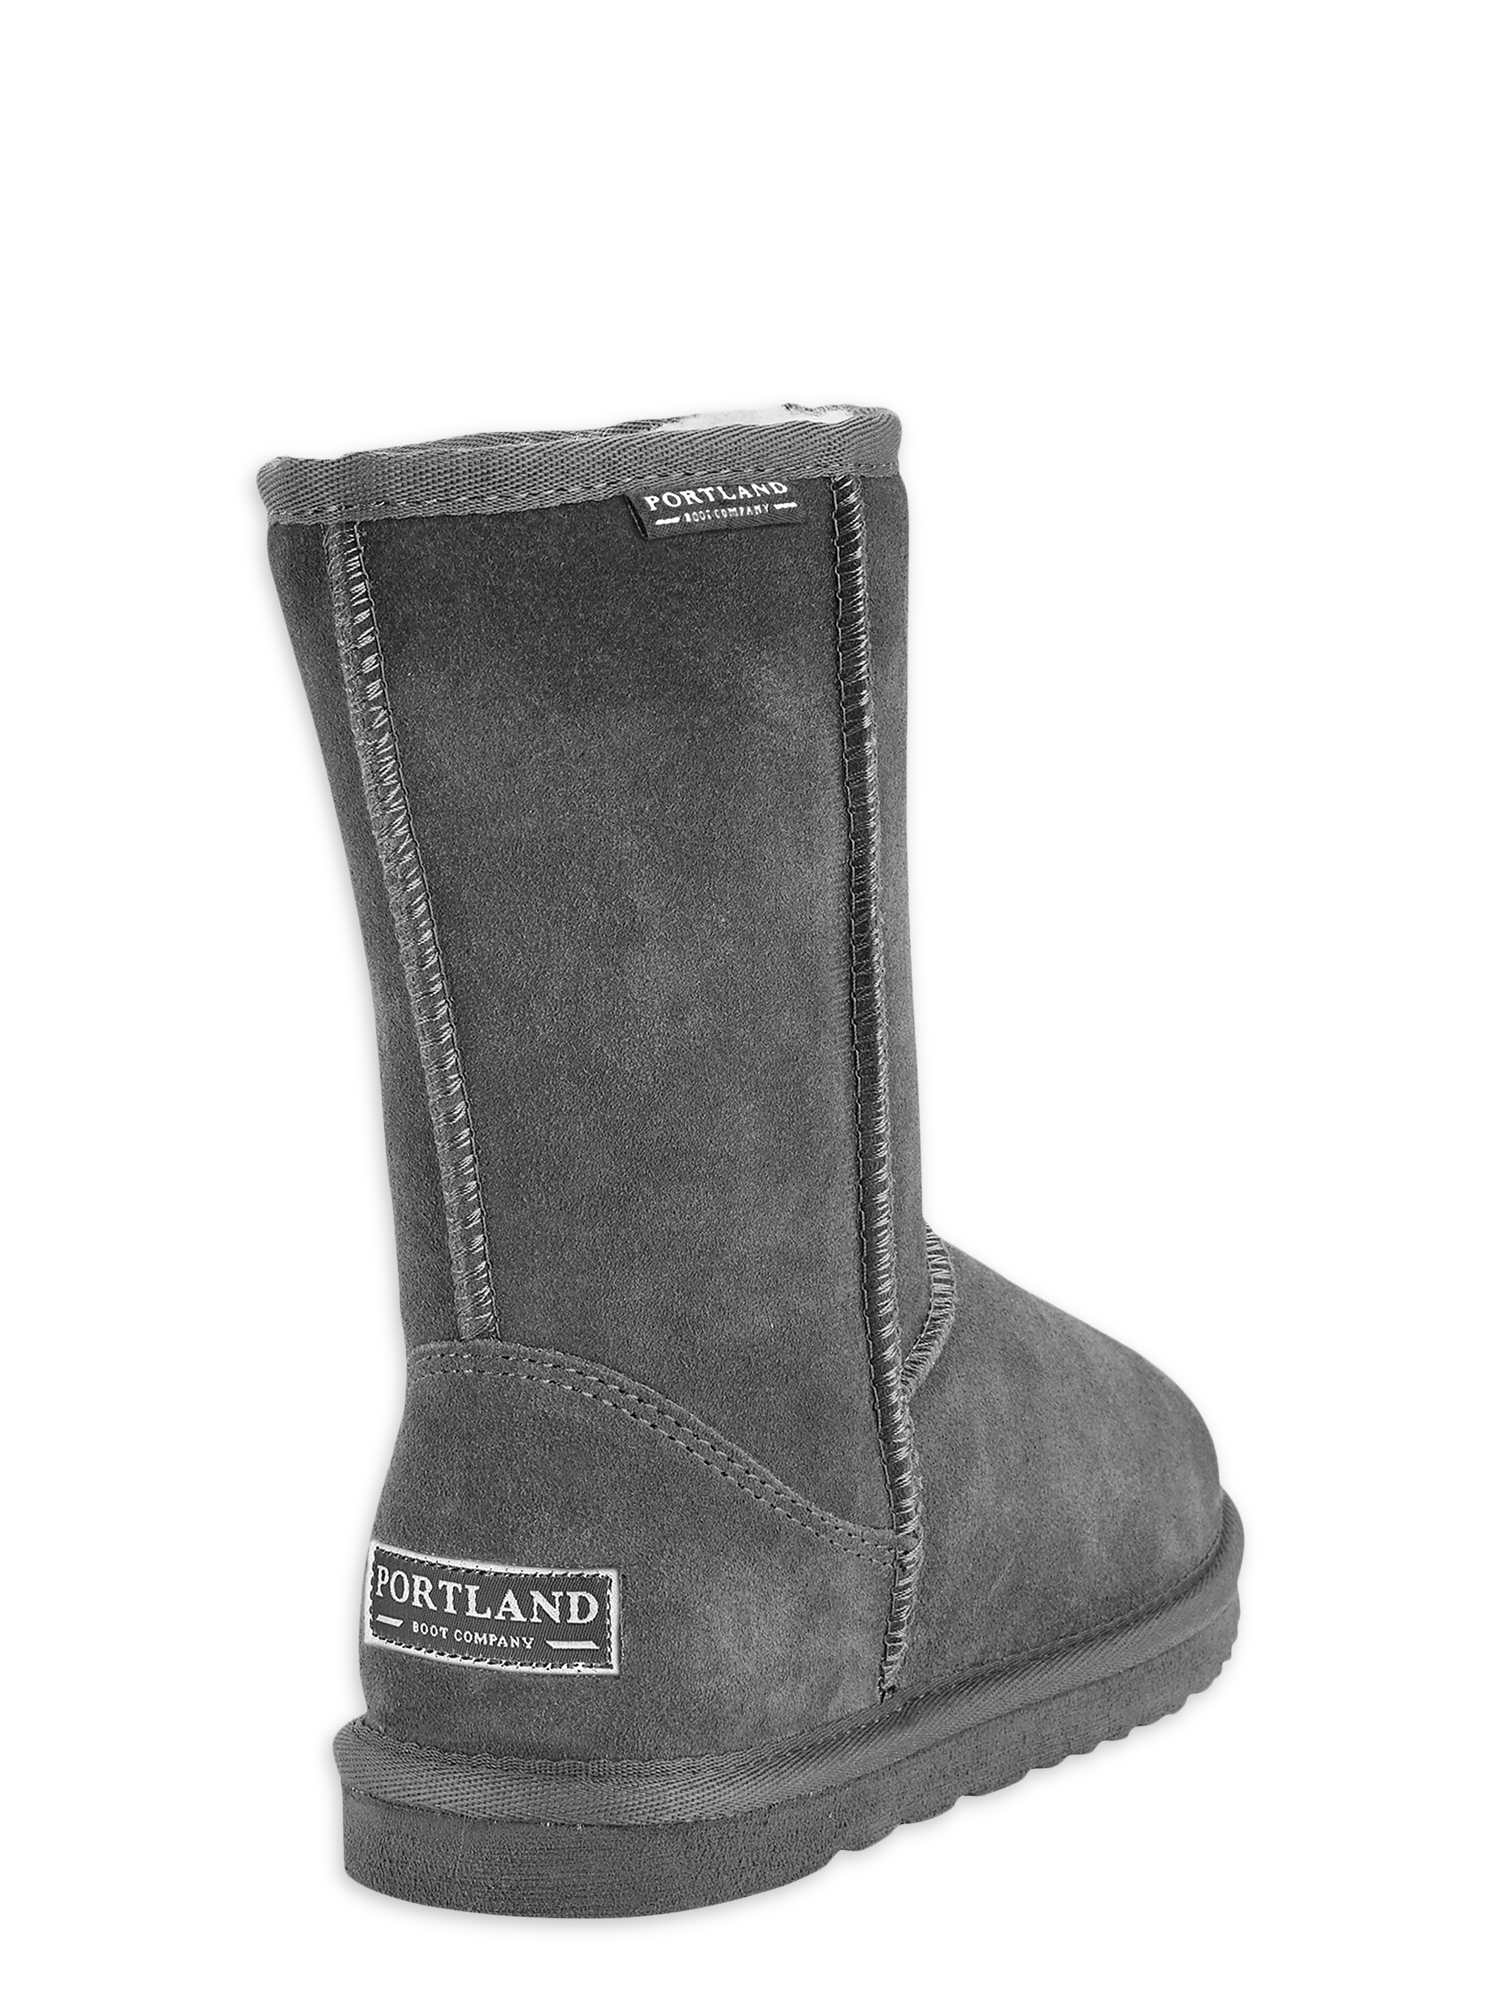 Portland Boot Company Women's Maryanne 8" Suede Winter Boot - image 4 of 5